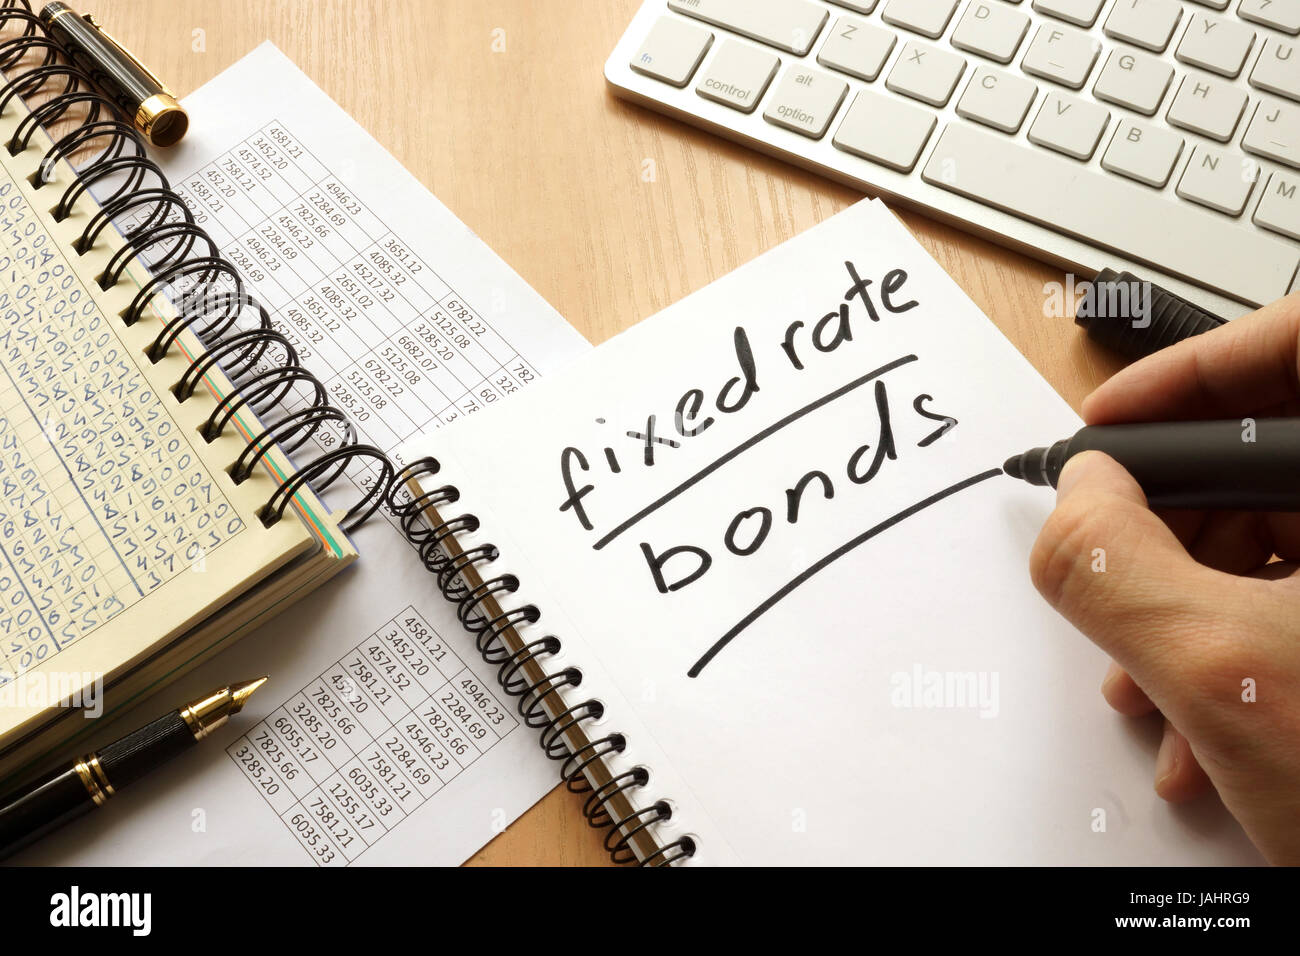 Fixed rate bonds written in a note. Trading concept. Stock Photo